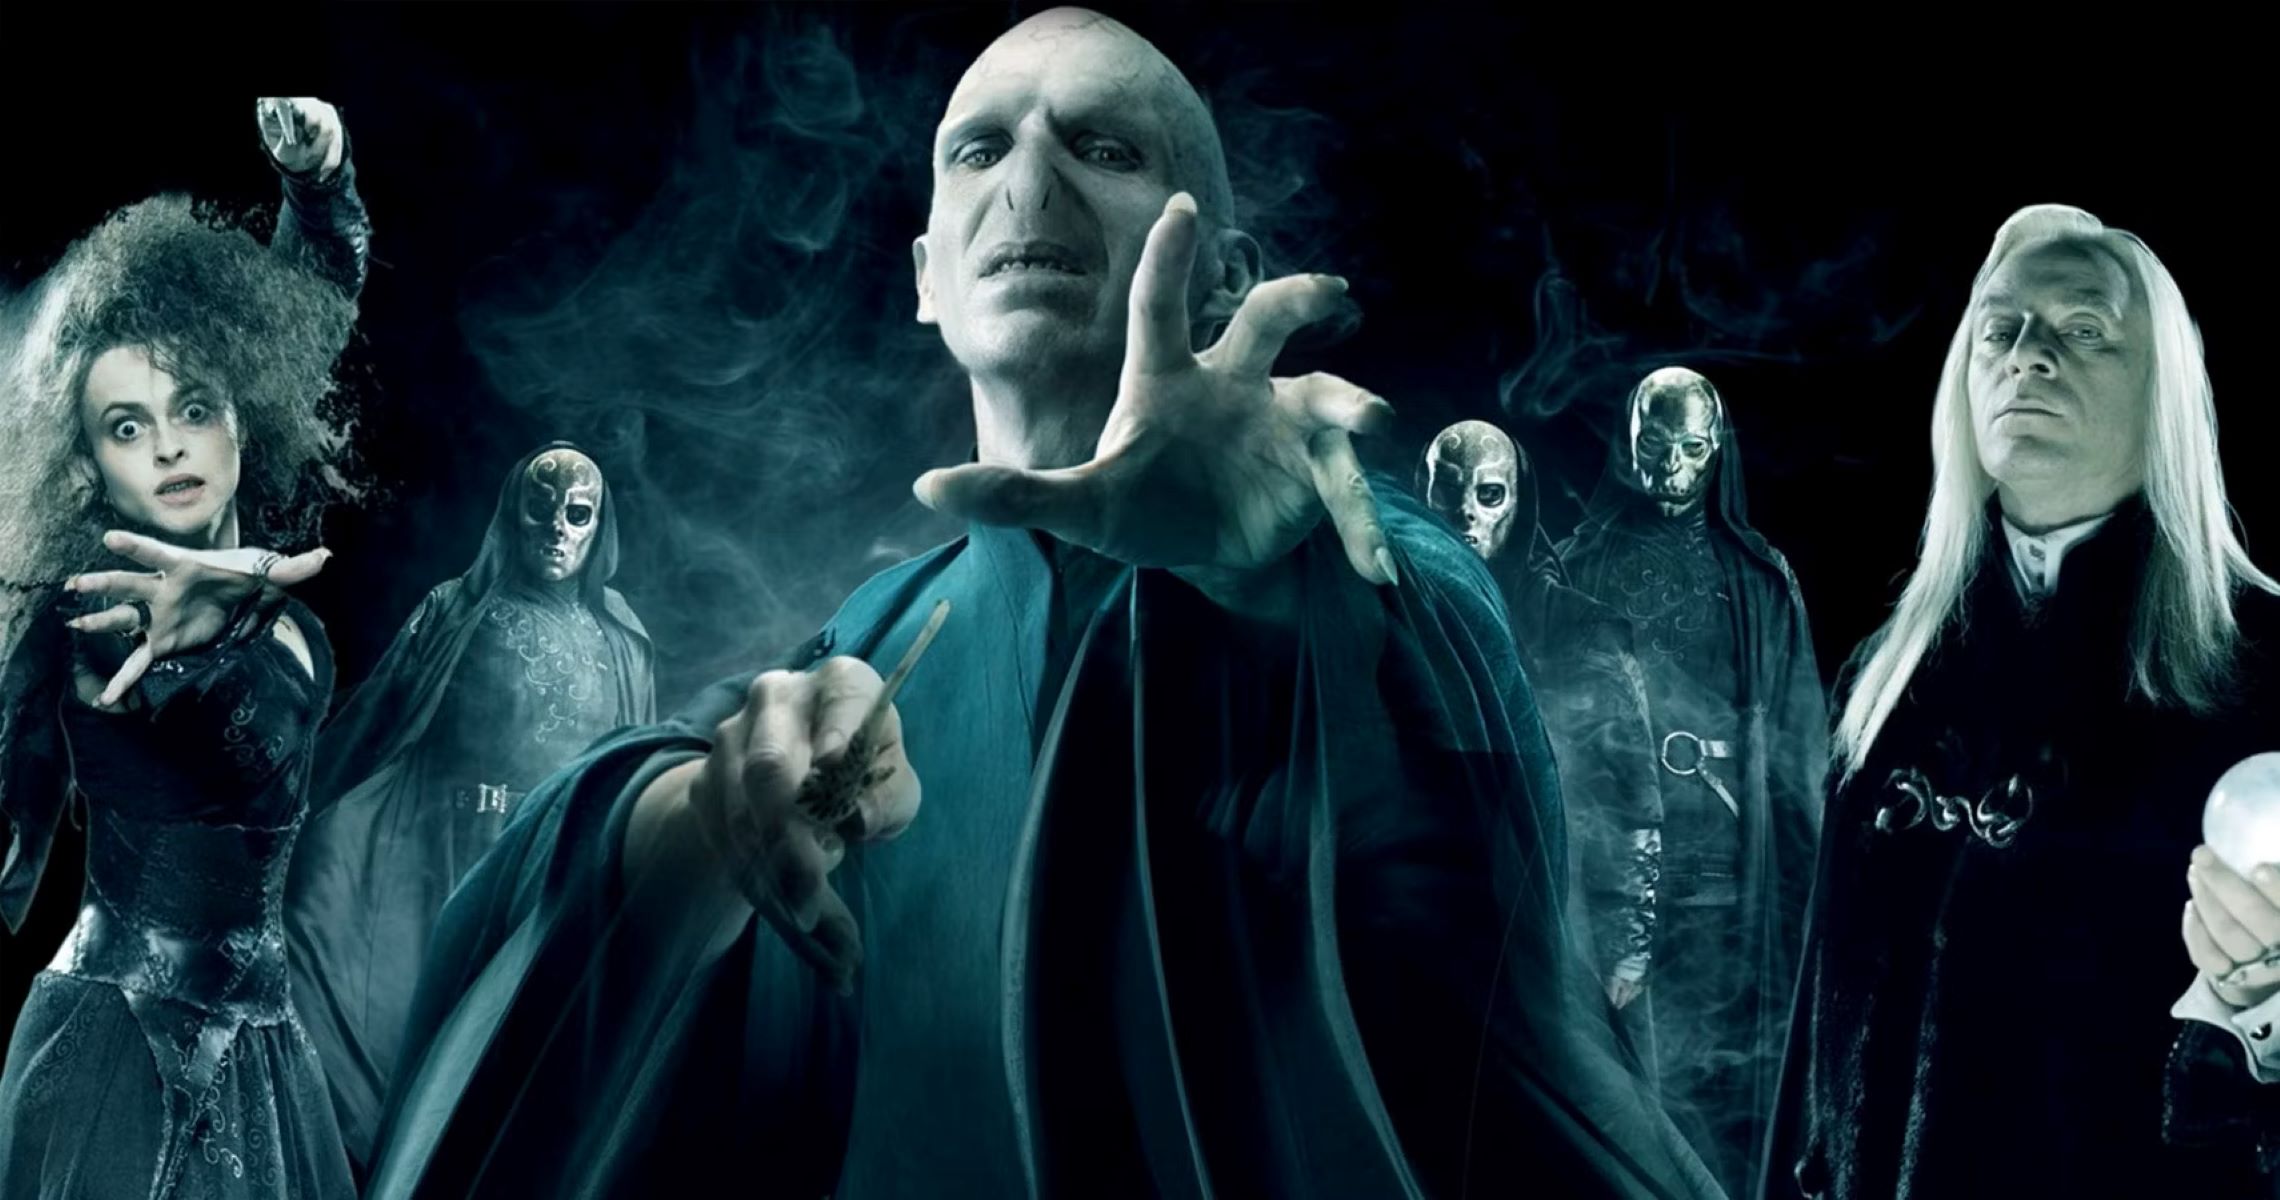 10 Epic Names For All-Powerful Dark Wizards